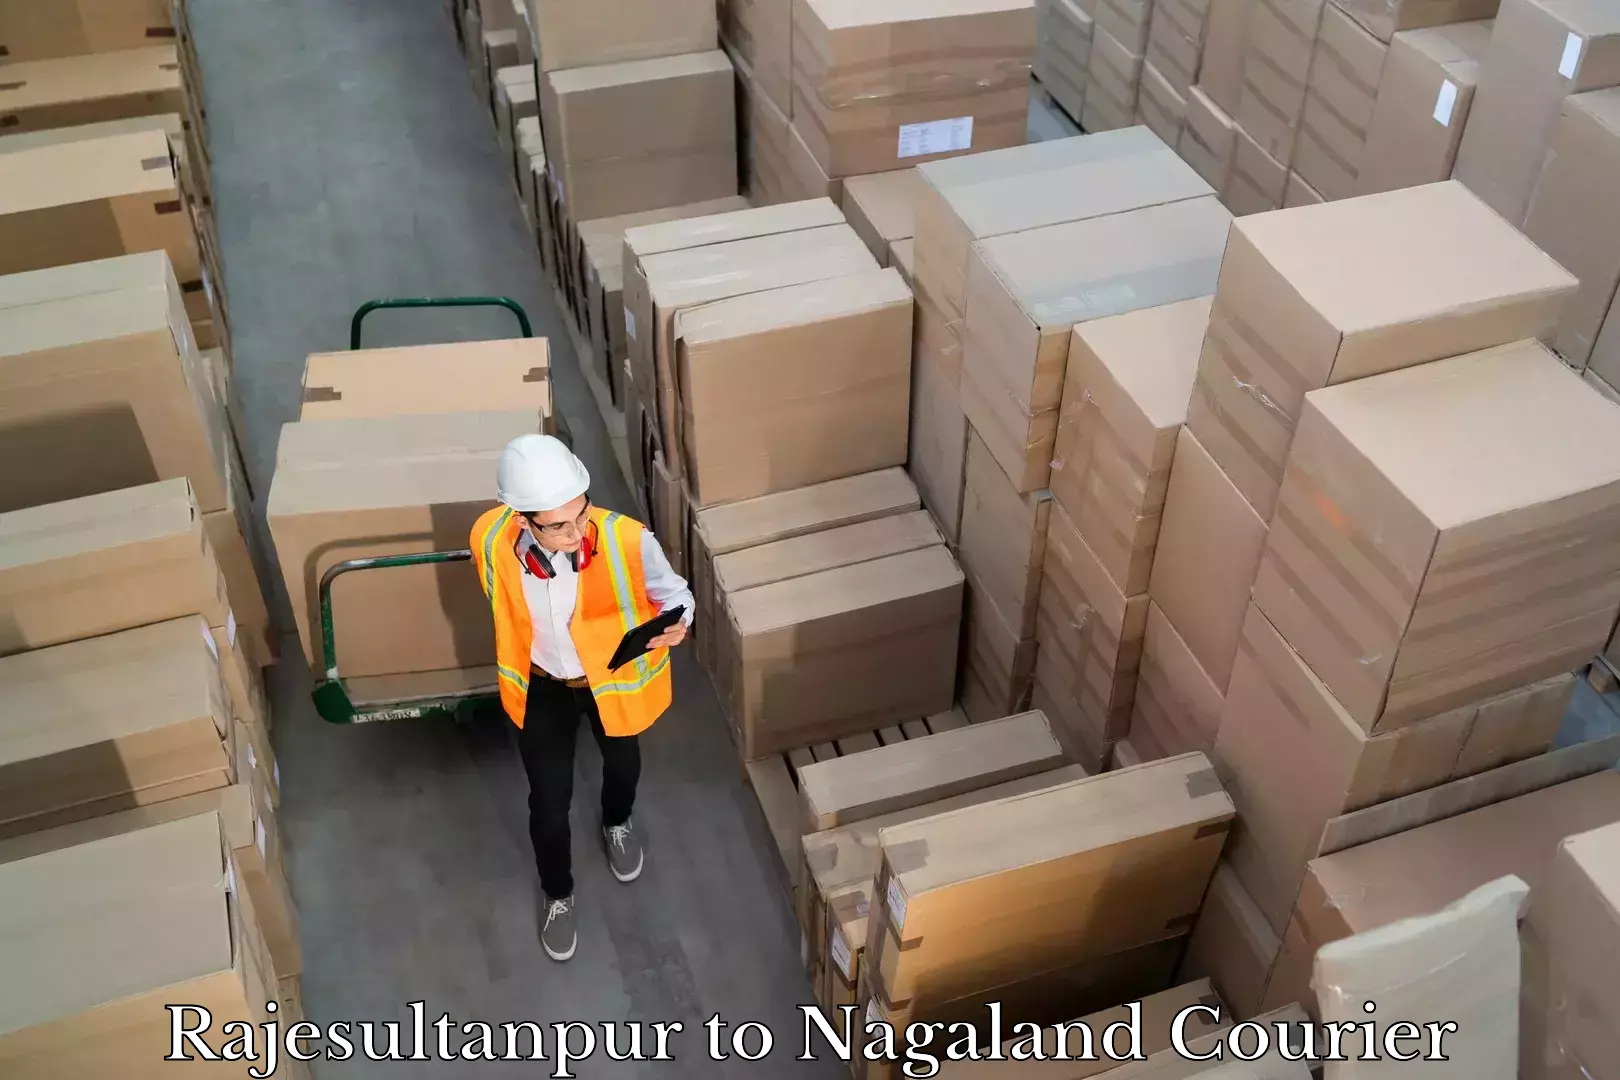 Parcel service for businesses in Rajesultanpur to Nagaland